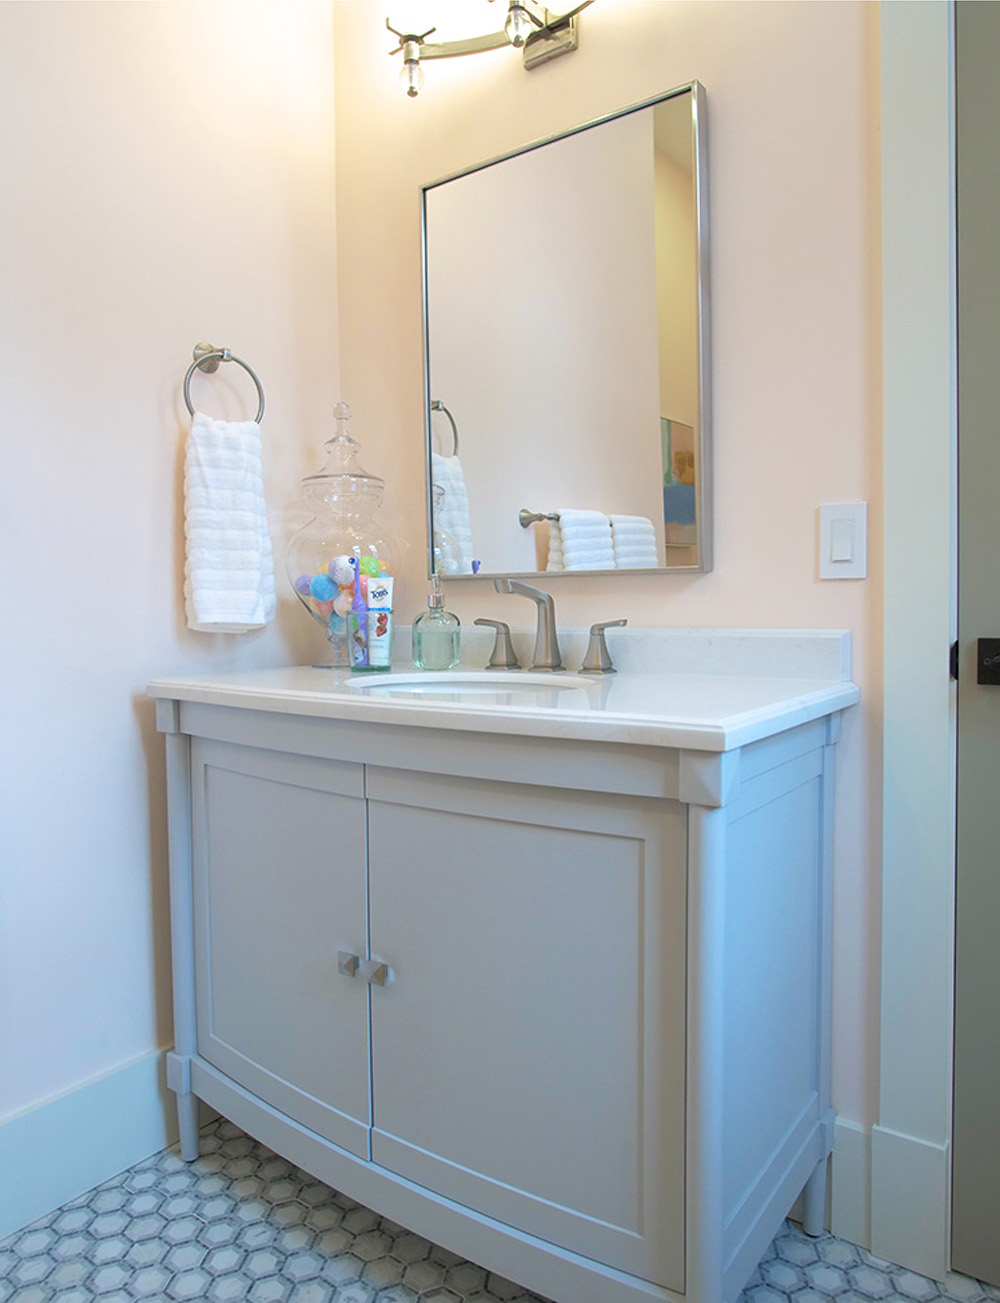 A grey blue vanity, mirror, silver appliances, white hand towel, and white and grey tiled floor.